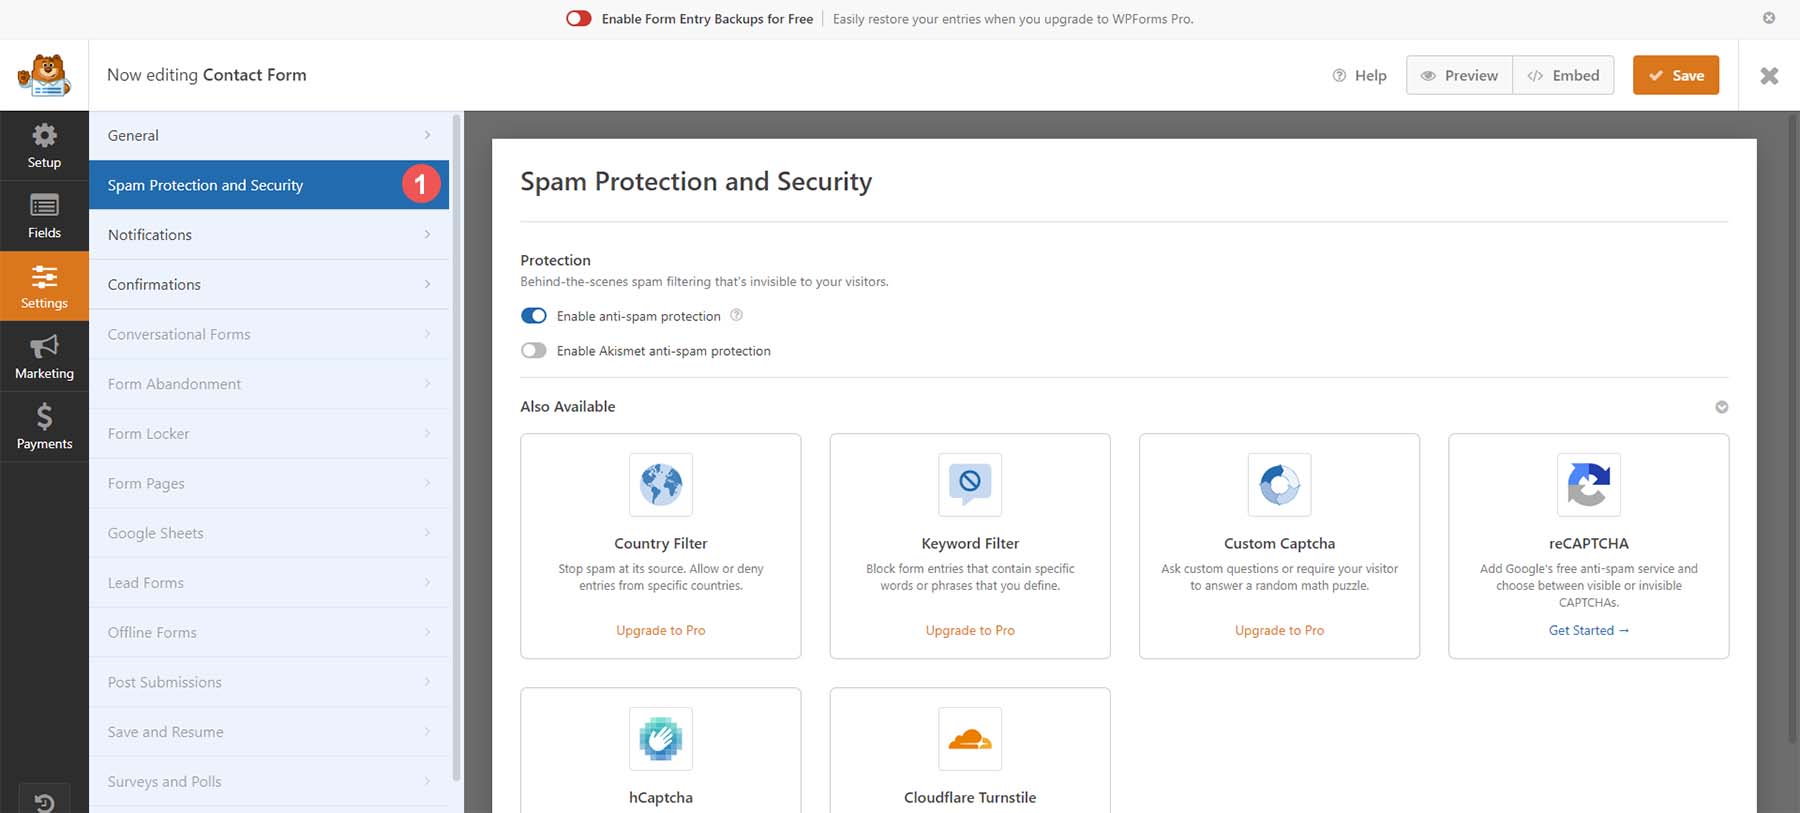 Spam and protection options with WPForms